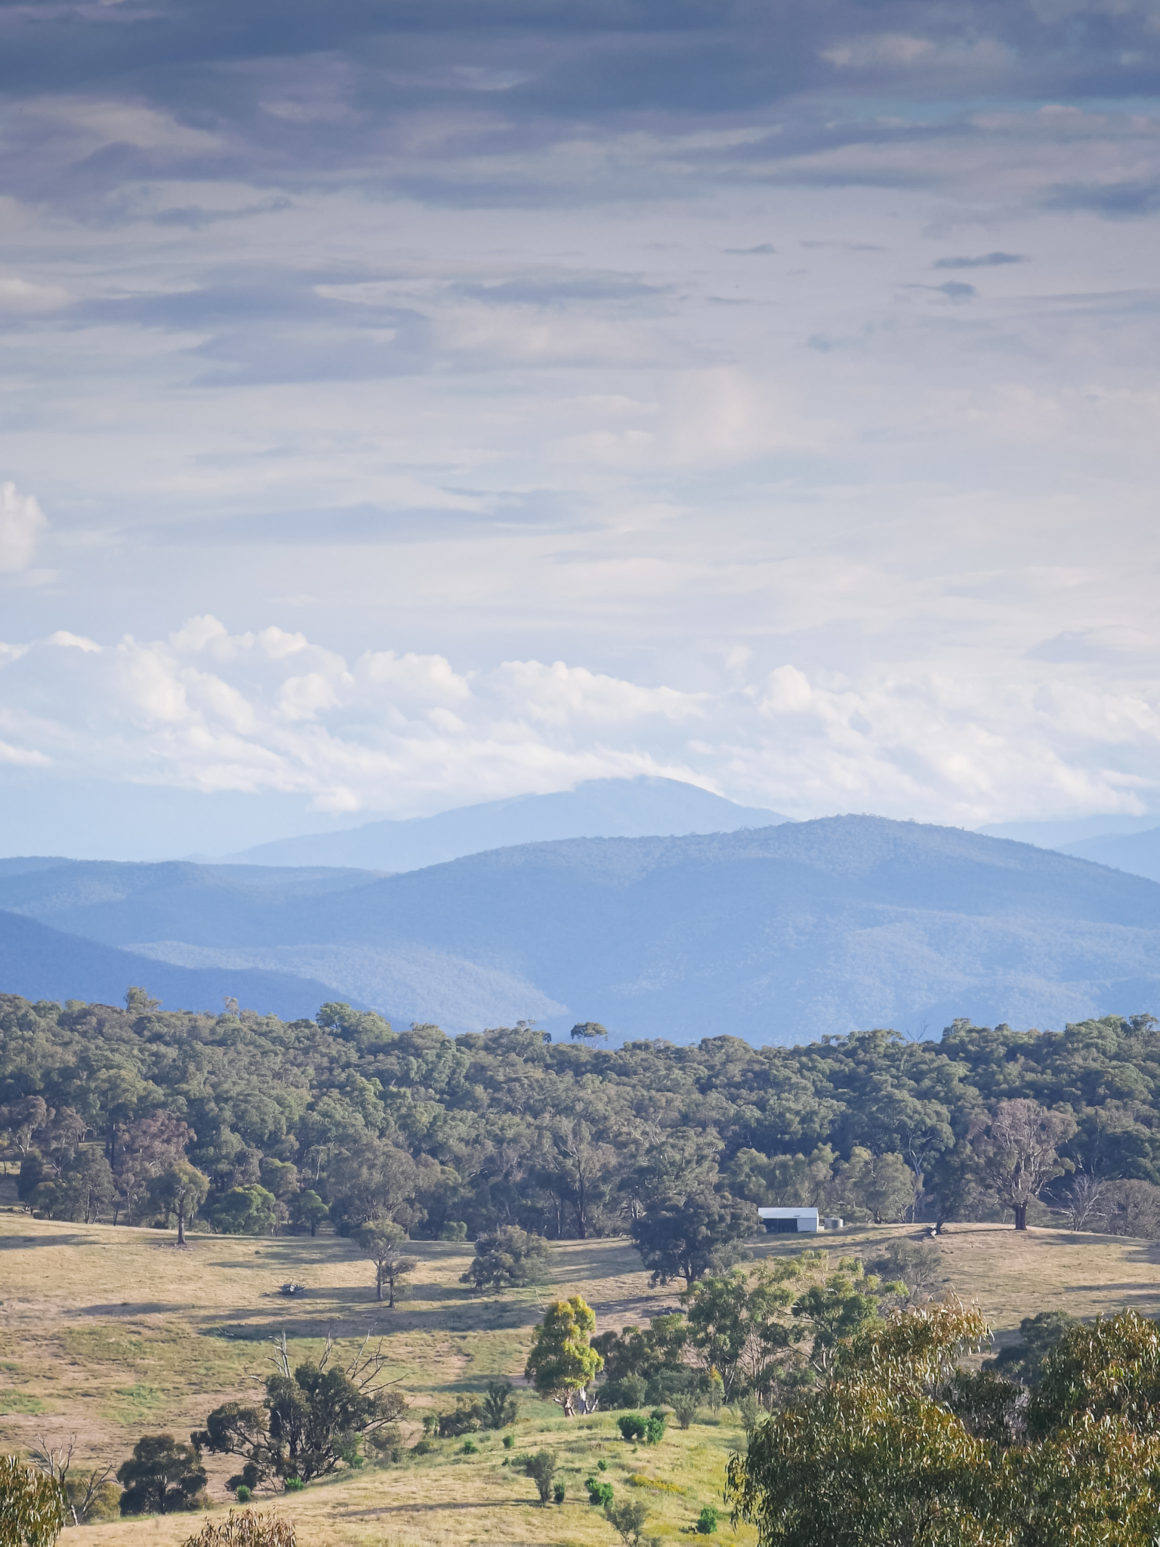 The view from Pauline's house, Tumbarumba, New South Wales, Australia © Claire Blumenfeld